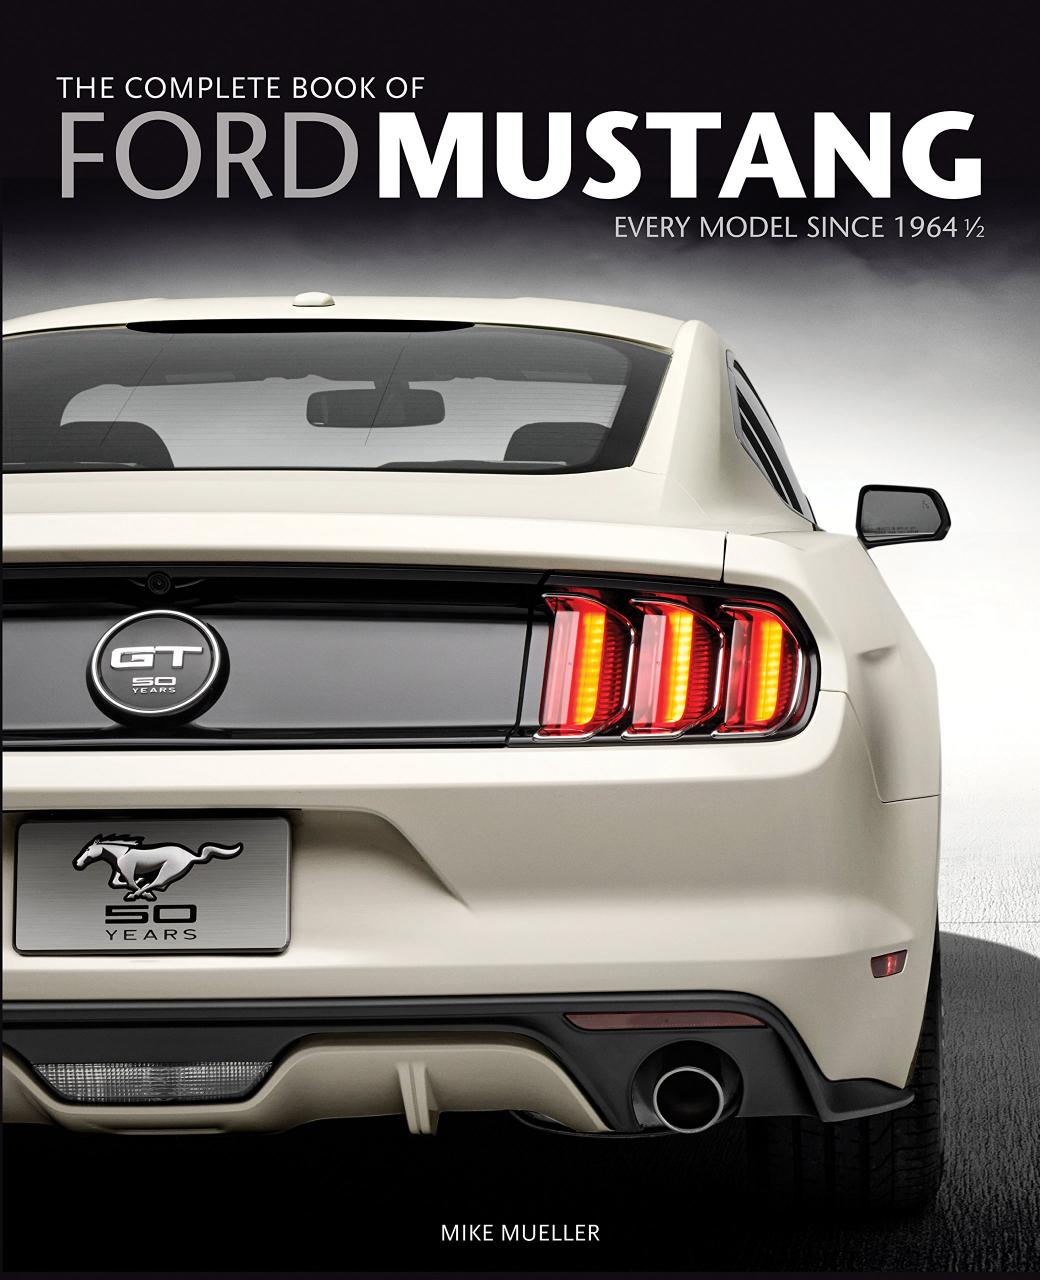 The Complete Book of Ford Mustang : Mike Mueller : 9780760372883